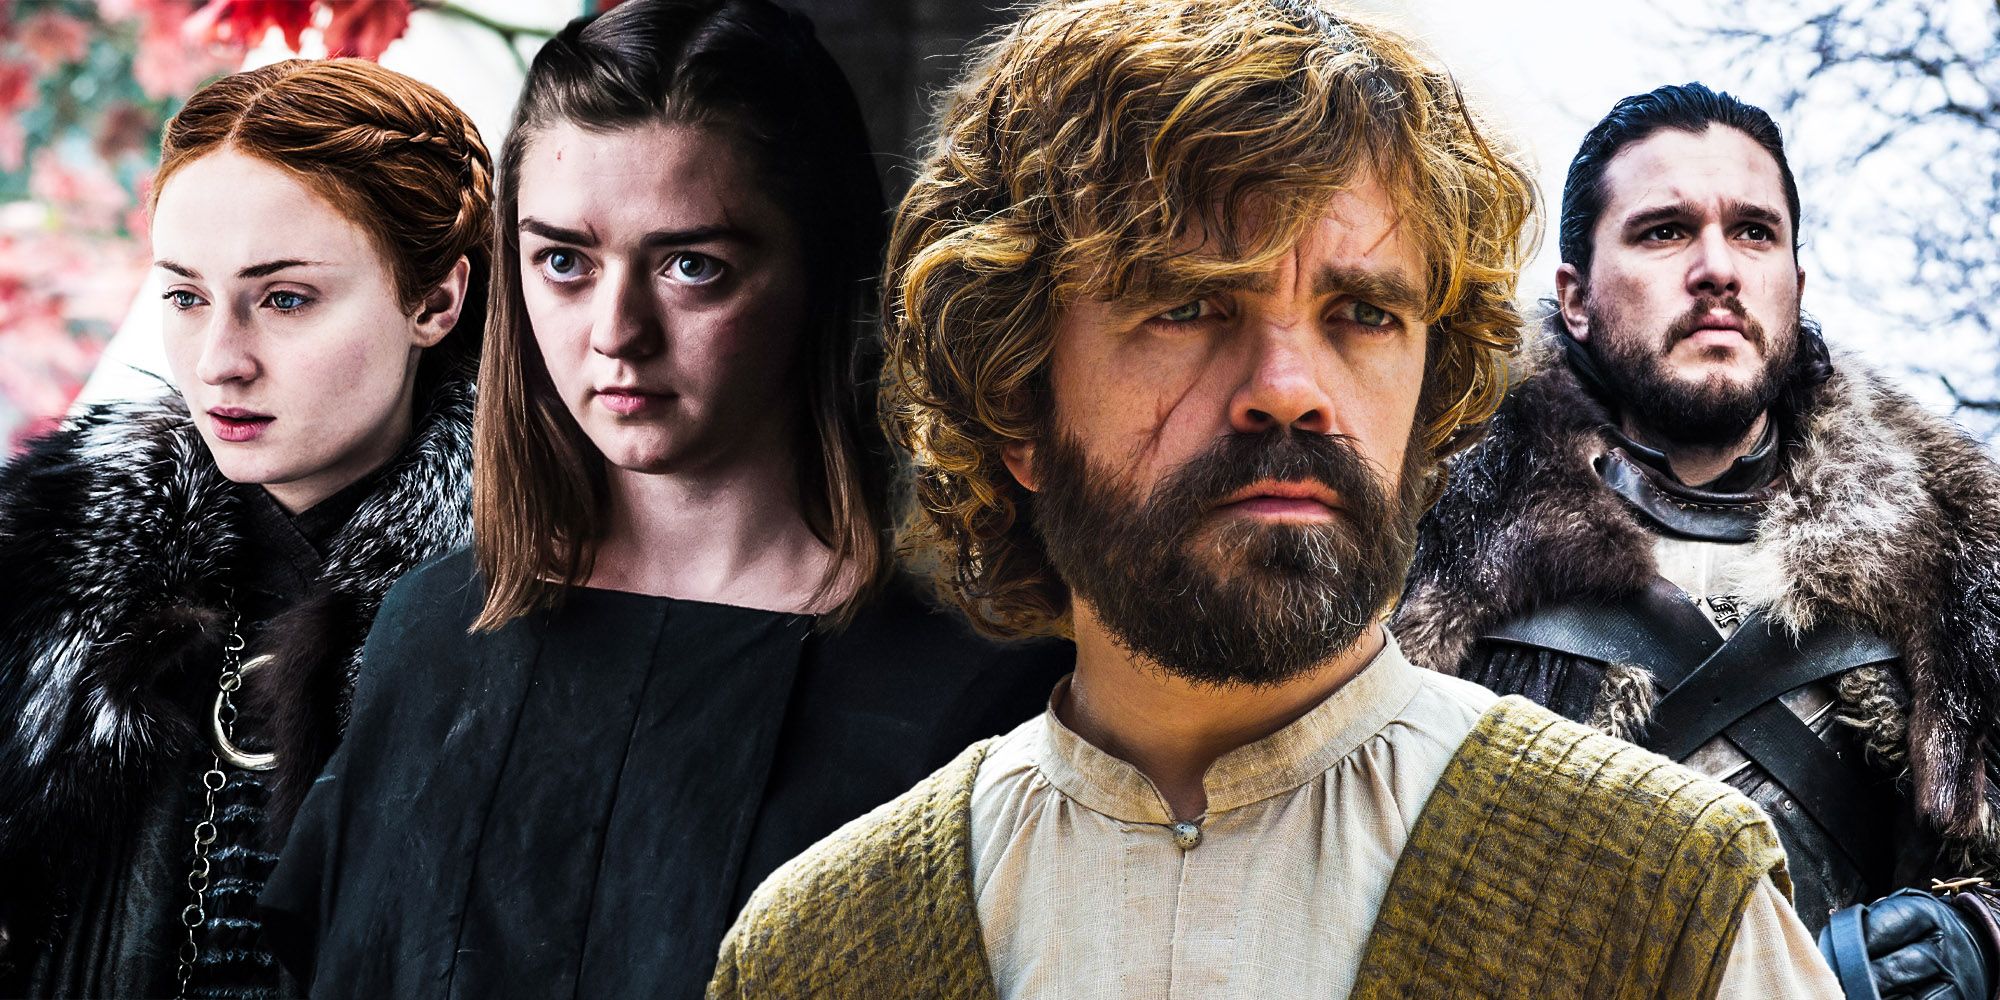 Game of thrones every character who survived from beginning to end sansa arya stark jon snow tyrion lannister